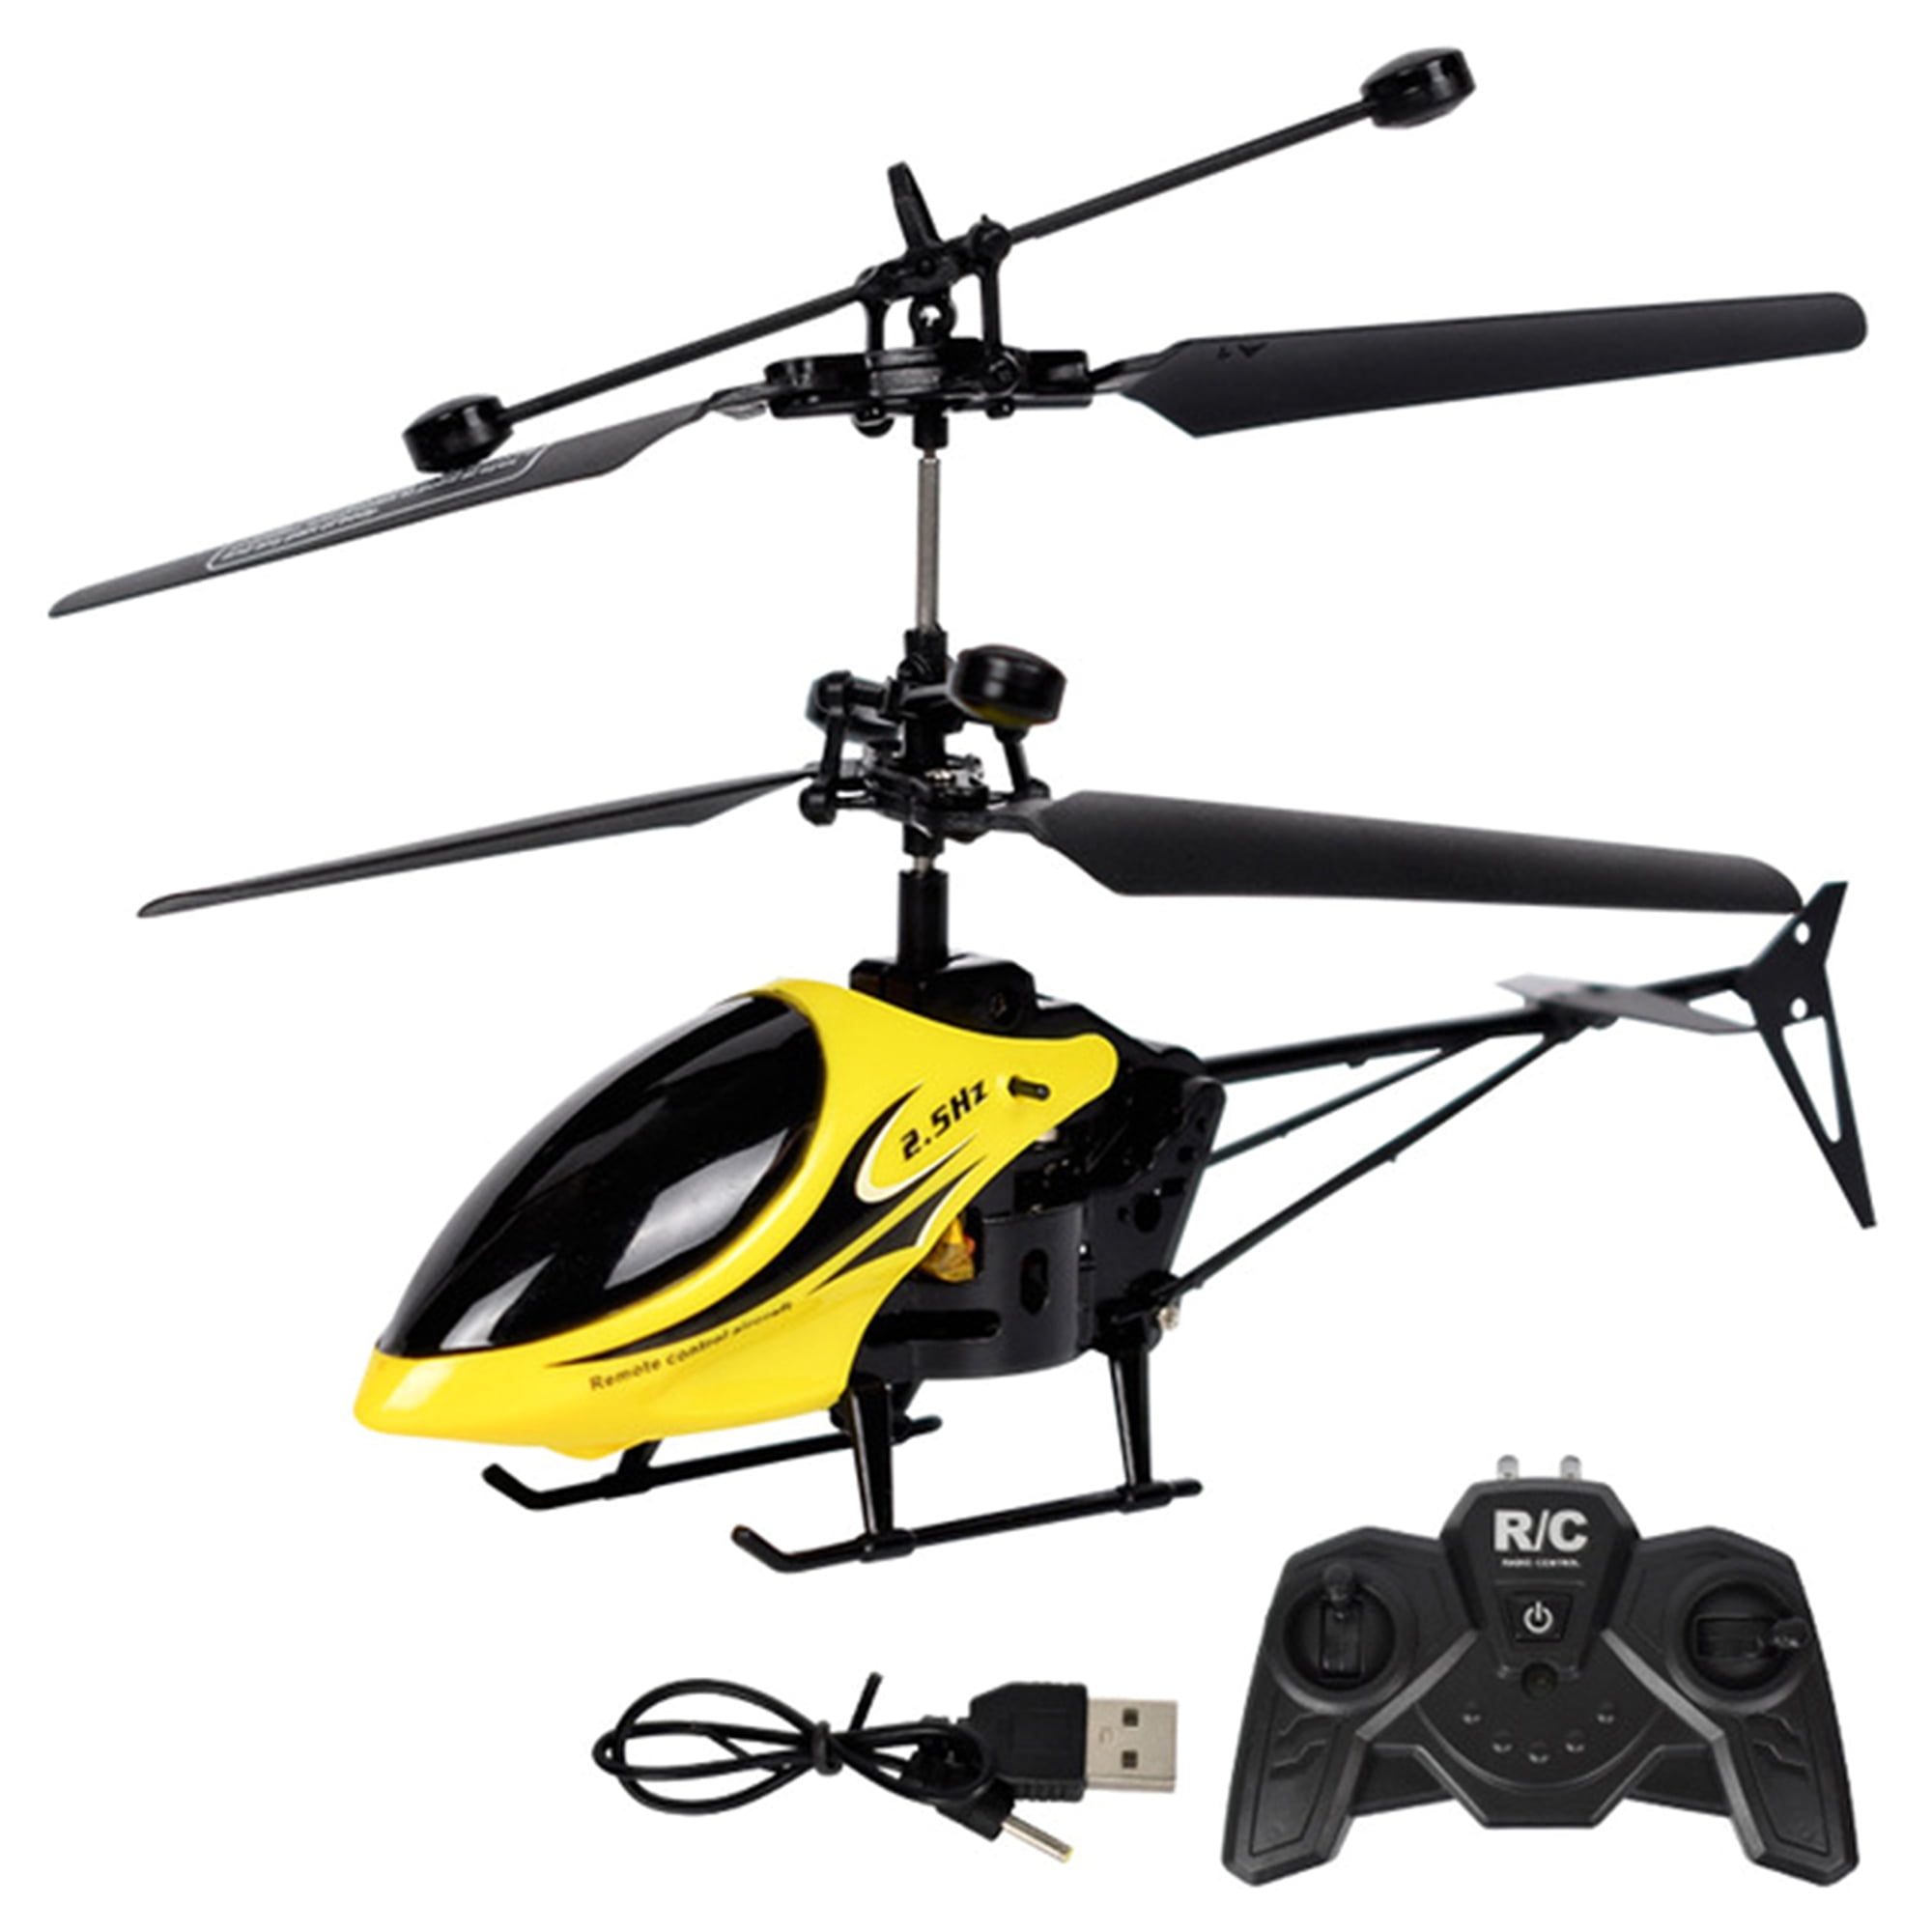 2 3 CHANNEL MINI INDOOR REMOTE CONTROL INFRARED HELICOPTER TRI-BAND RC KIDS TOY 